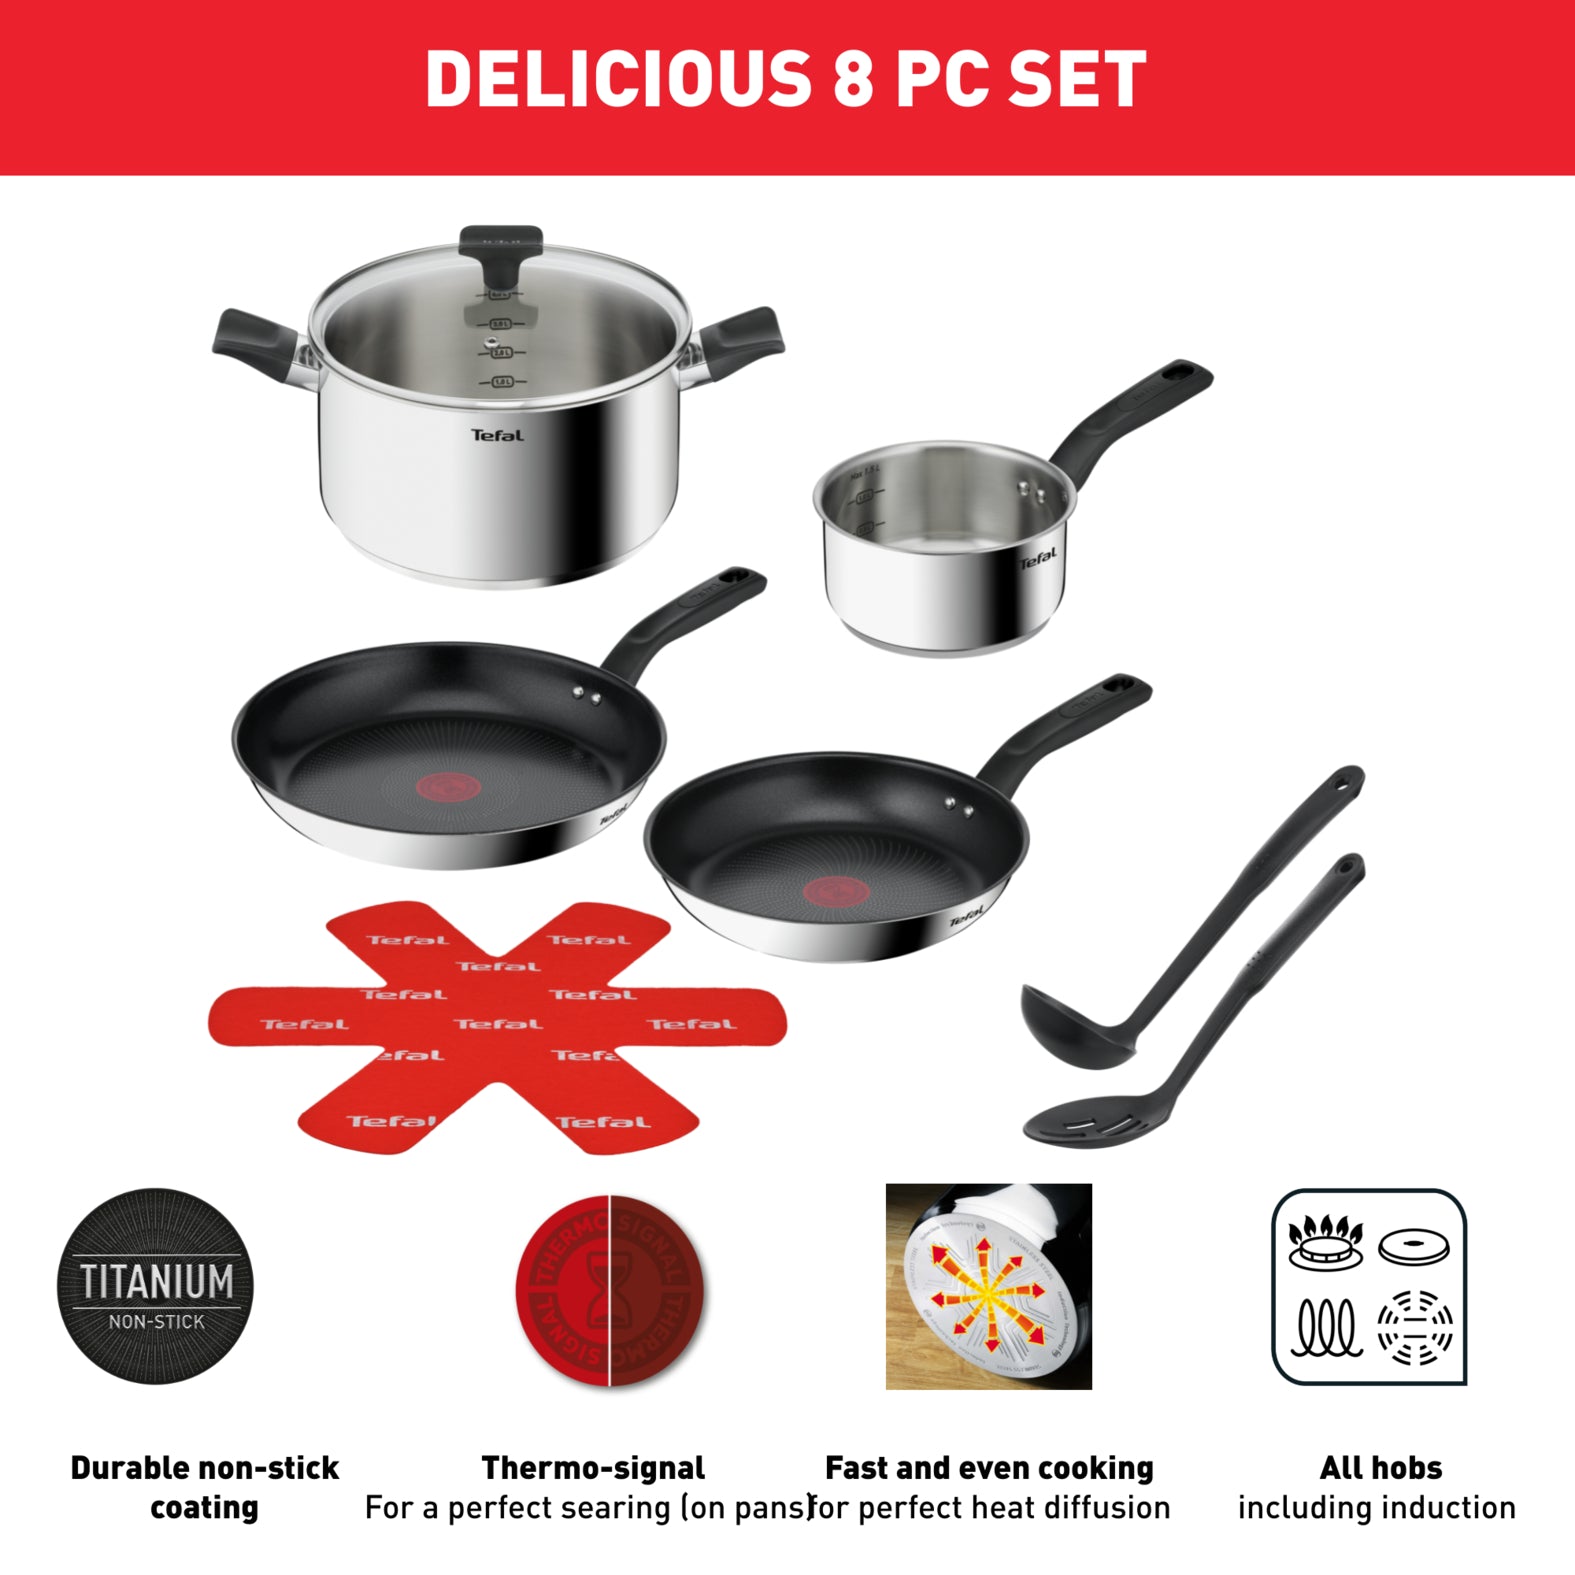 Tefal Delicious Stainless Steel 8pc Mixed Set